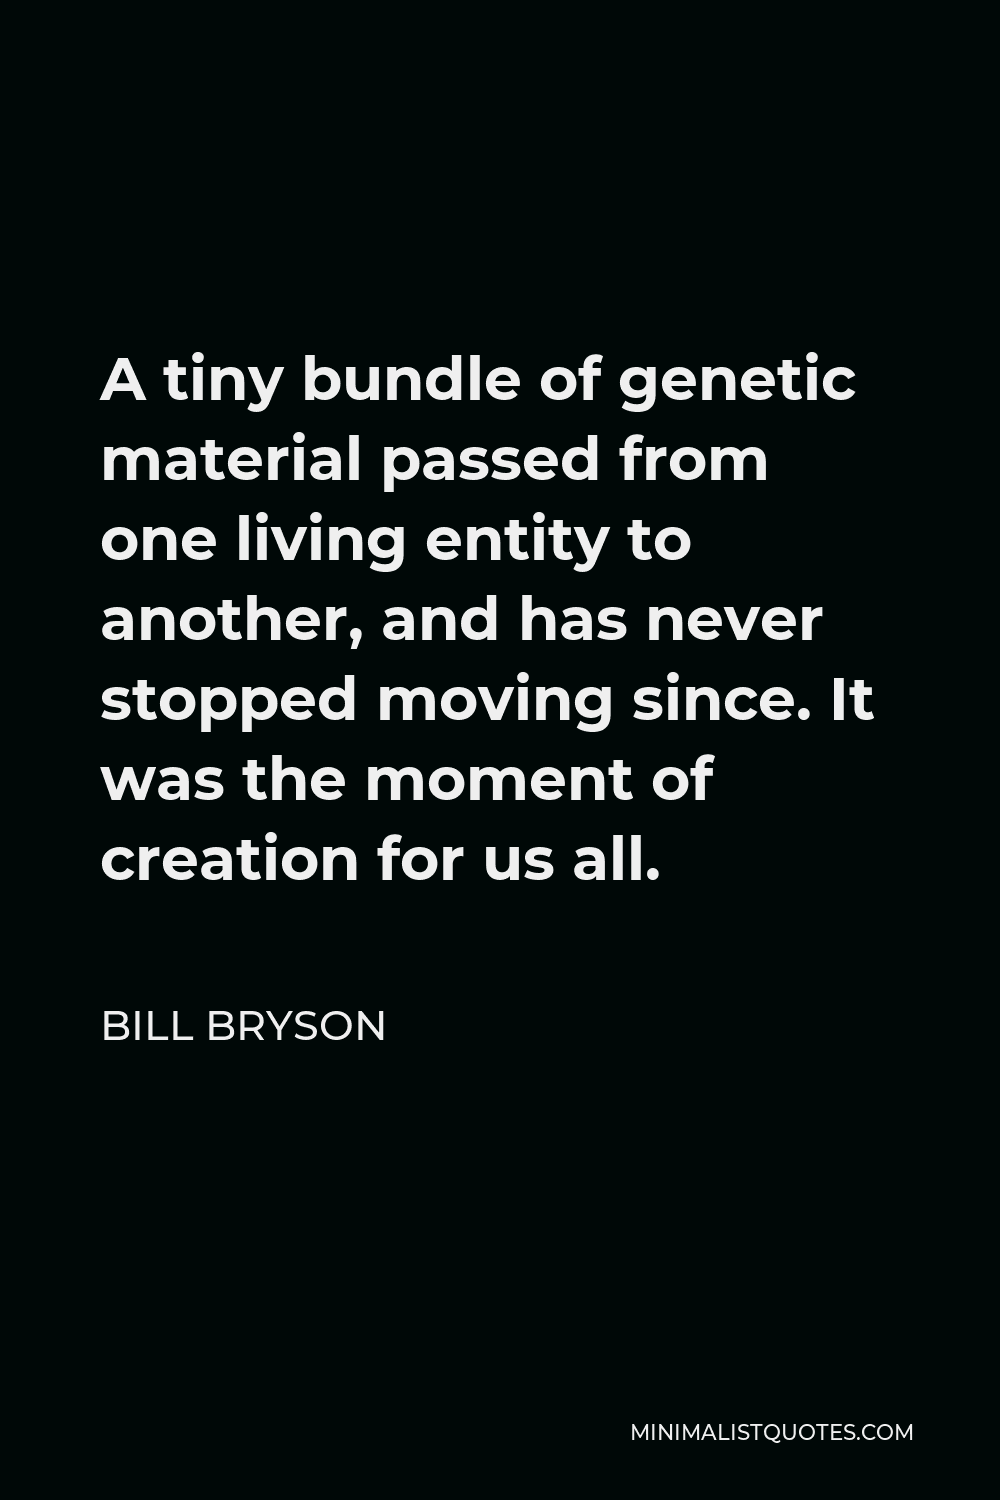 Bill Bryson Quote - A tiny bundle of genetic material passed from one living entity to another, and has never stopped moving since. It was the moment of creation for us all.